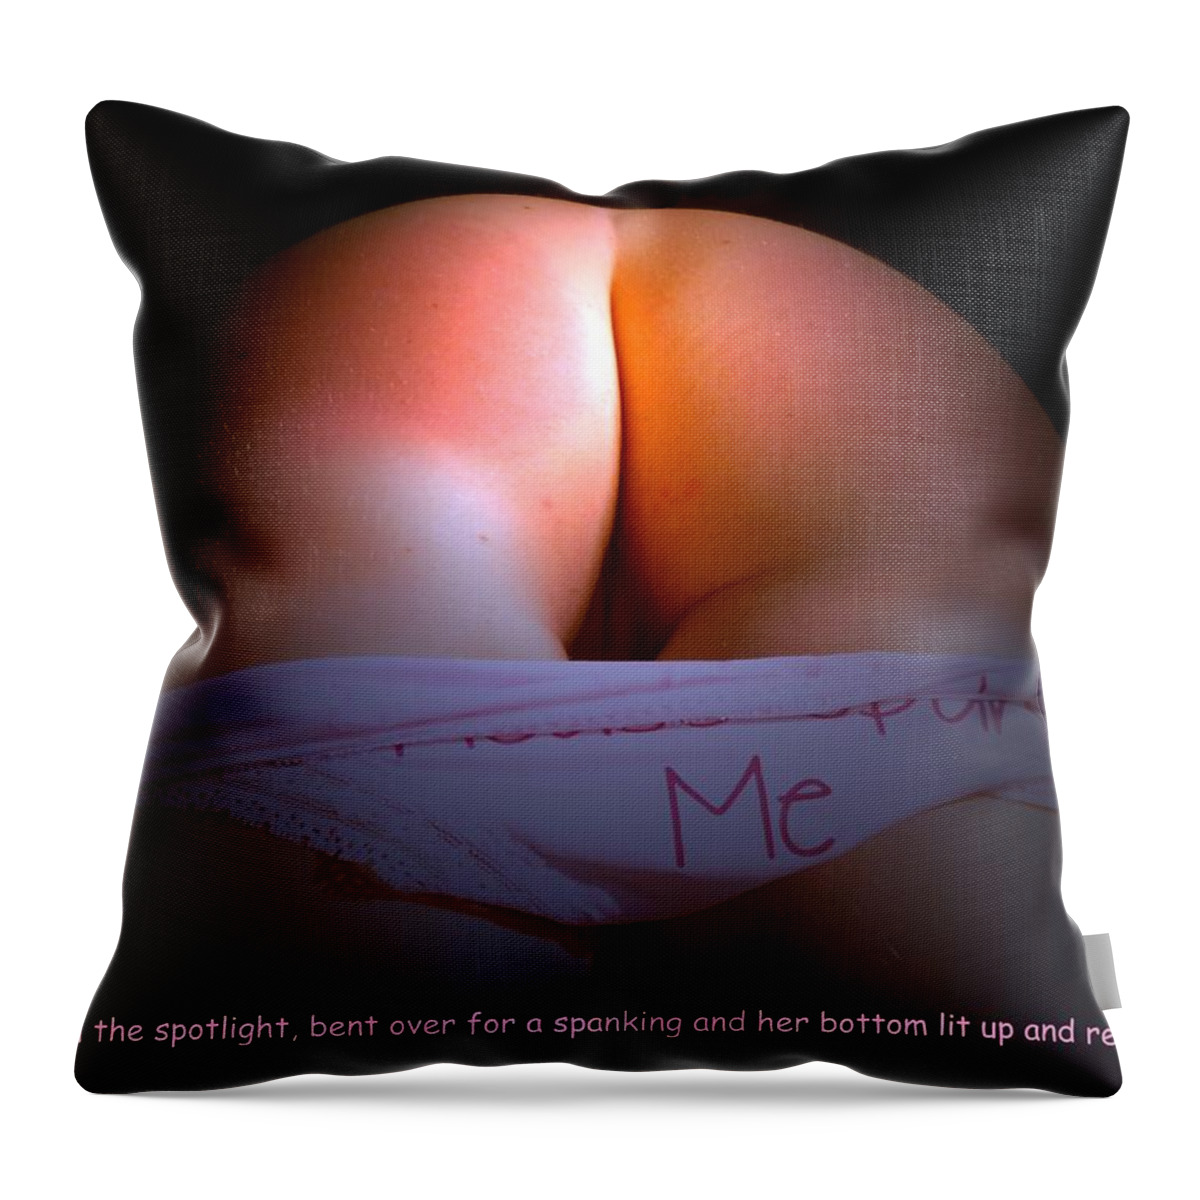 Spank Throw Pillow featuring the photograph Lit Up For Spanking by Asa Jones